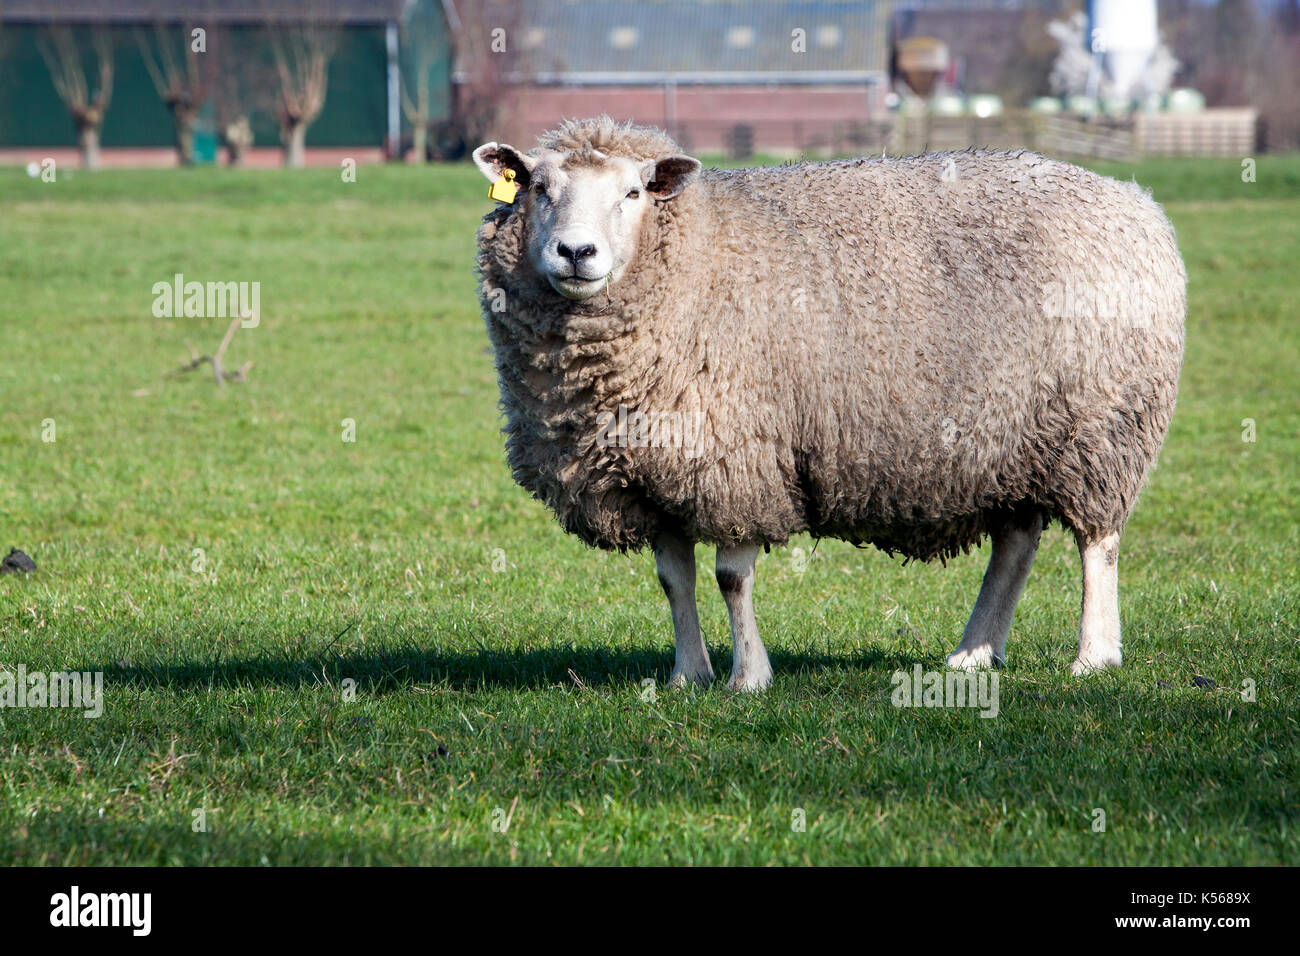 Sheep looking at camera and a farm in the background Stock Photo